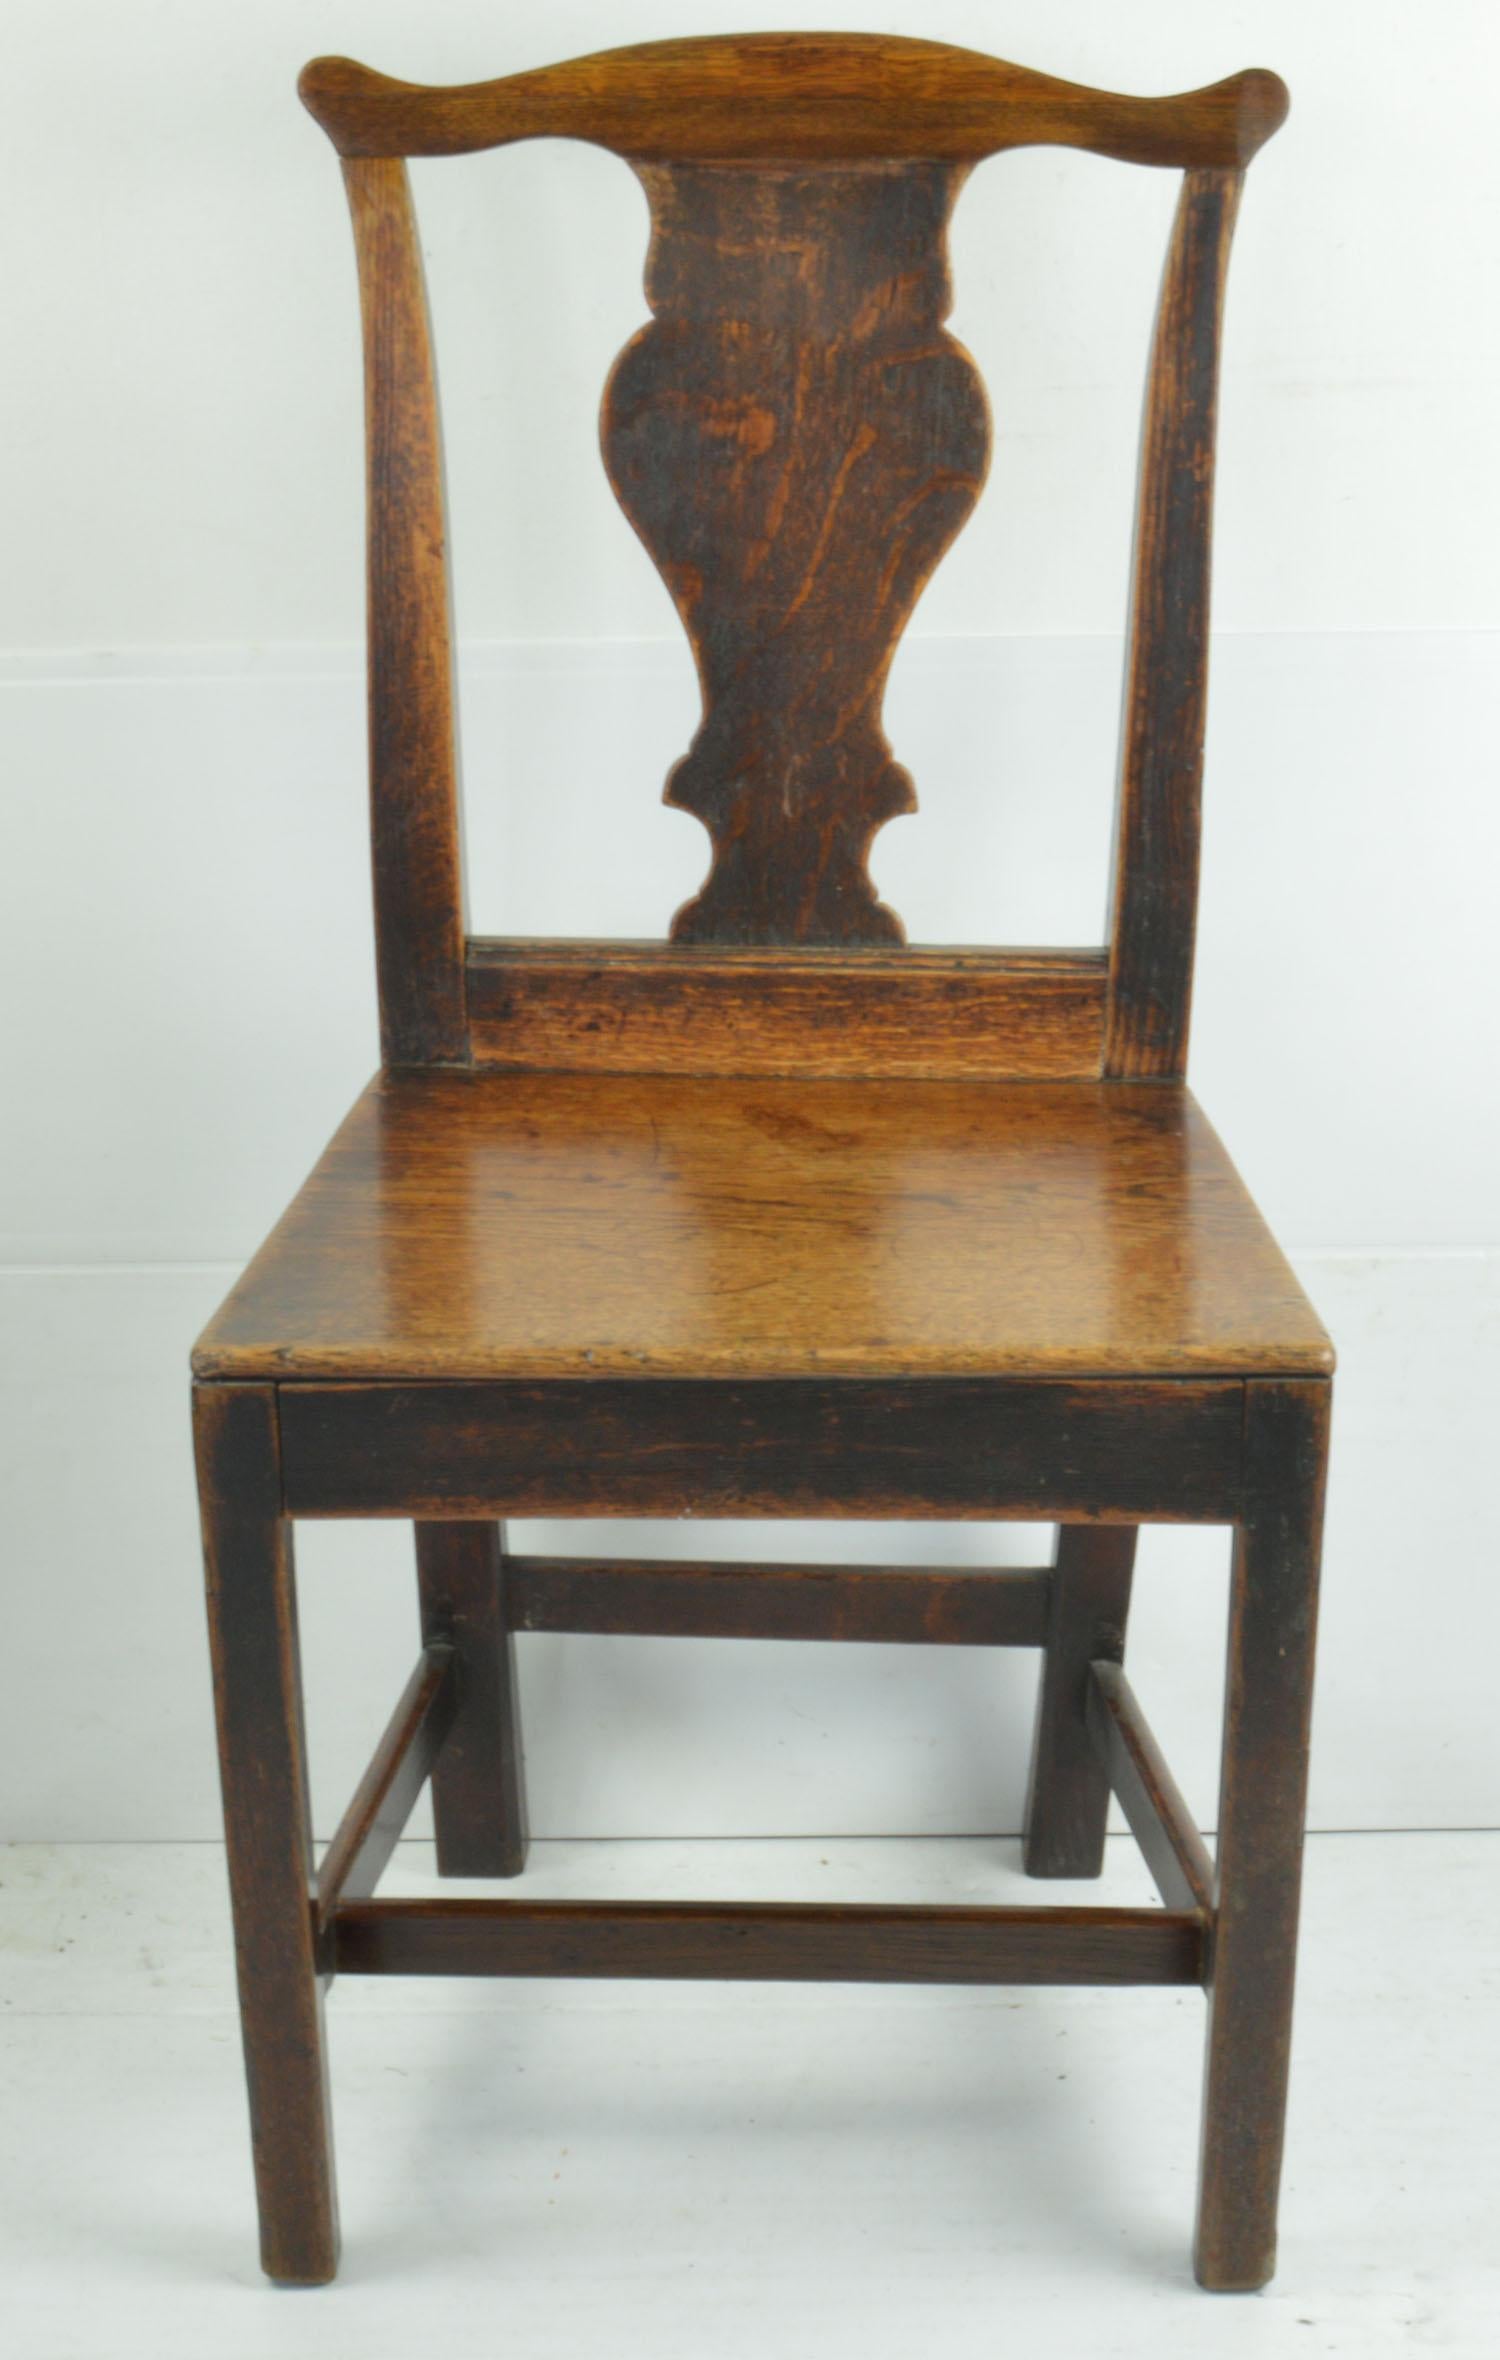 Polished Set of 4 Antique Oak Country Chippendale Chairs, English, 18th Century